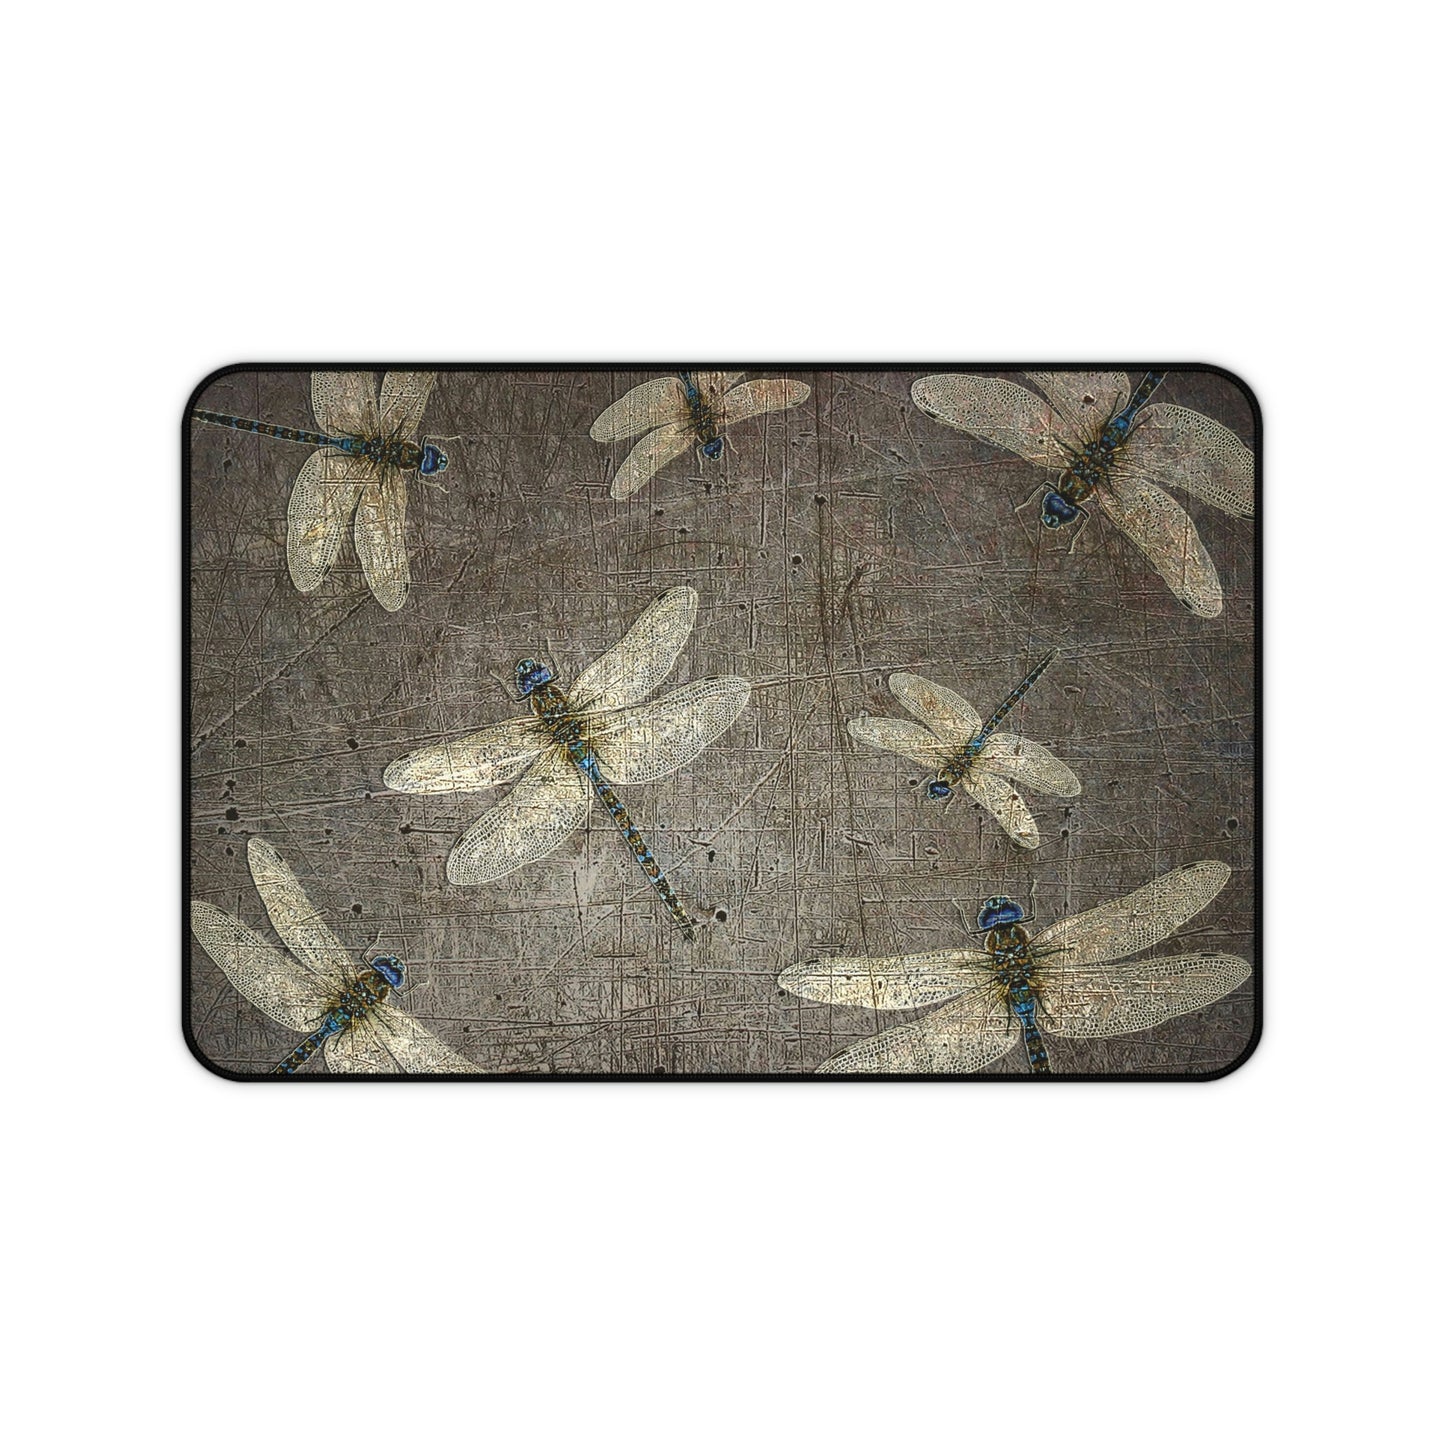 Dragonfly Desk Mat - Flight of Dragonflies on Distressed Grey Background Print 12x18 in situ